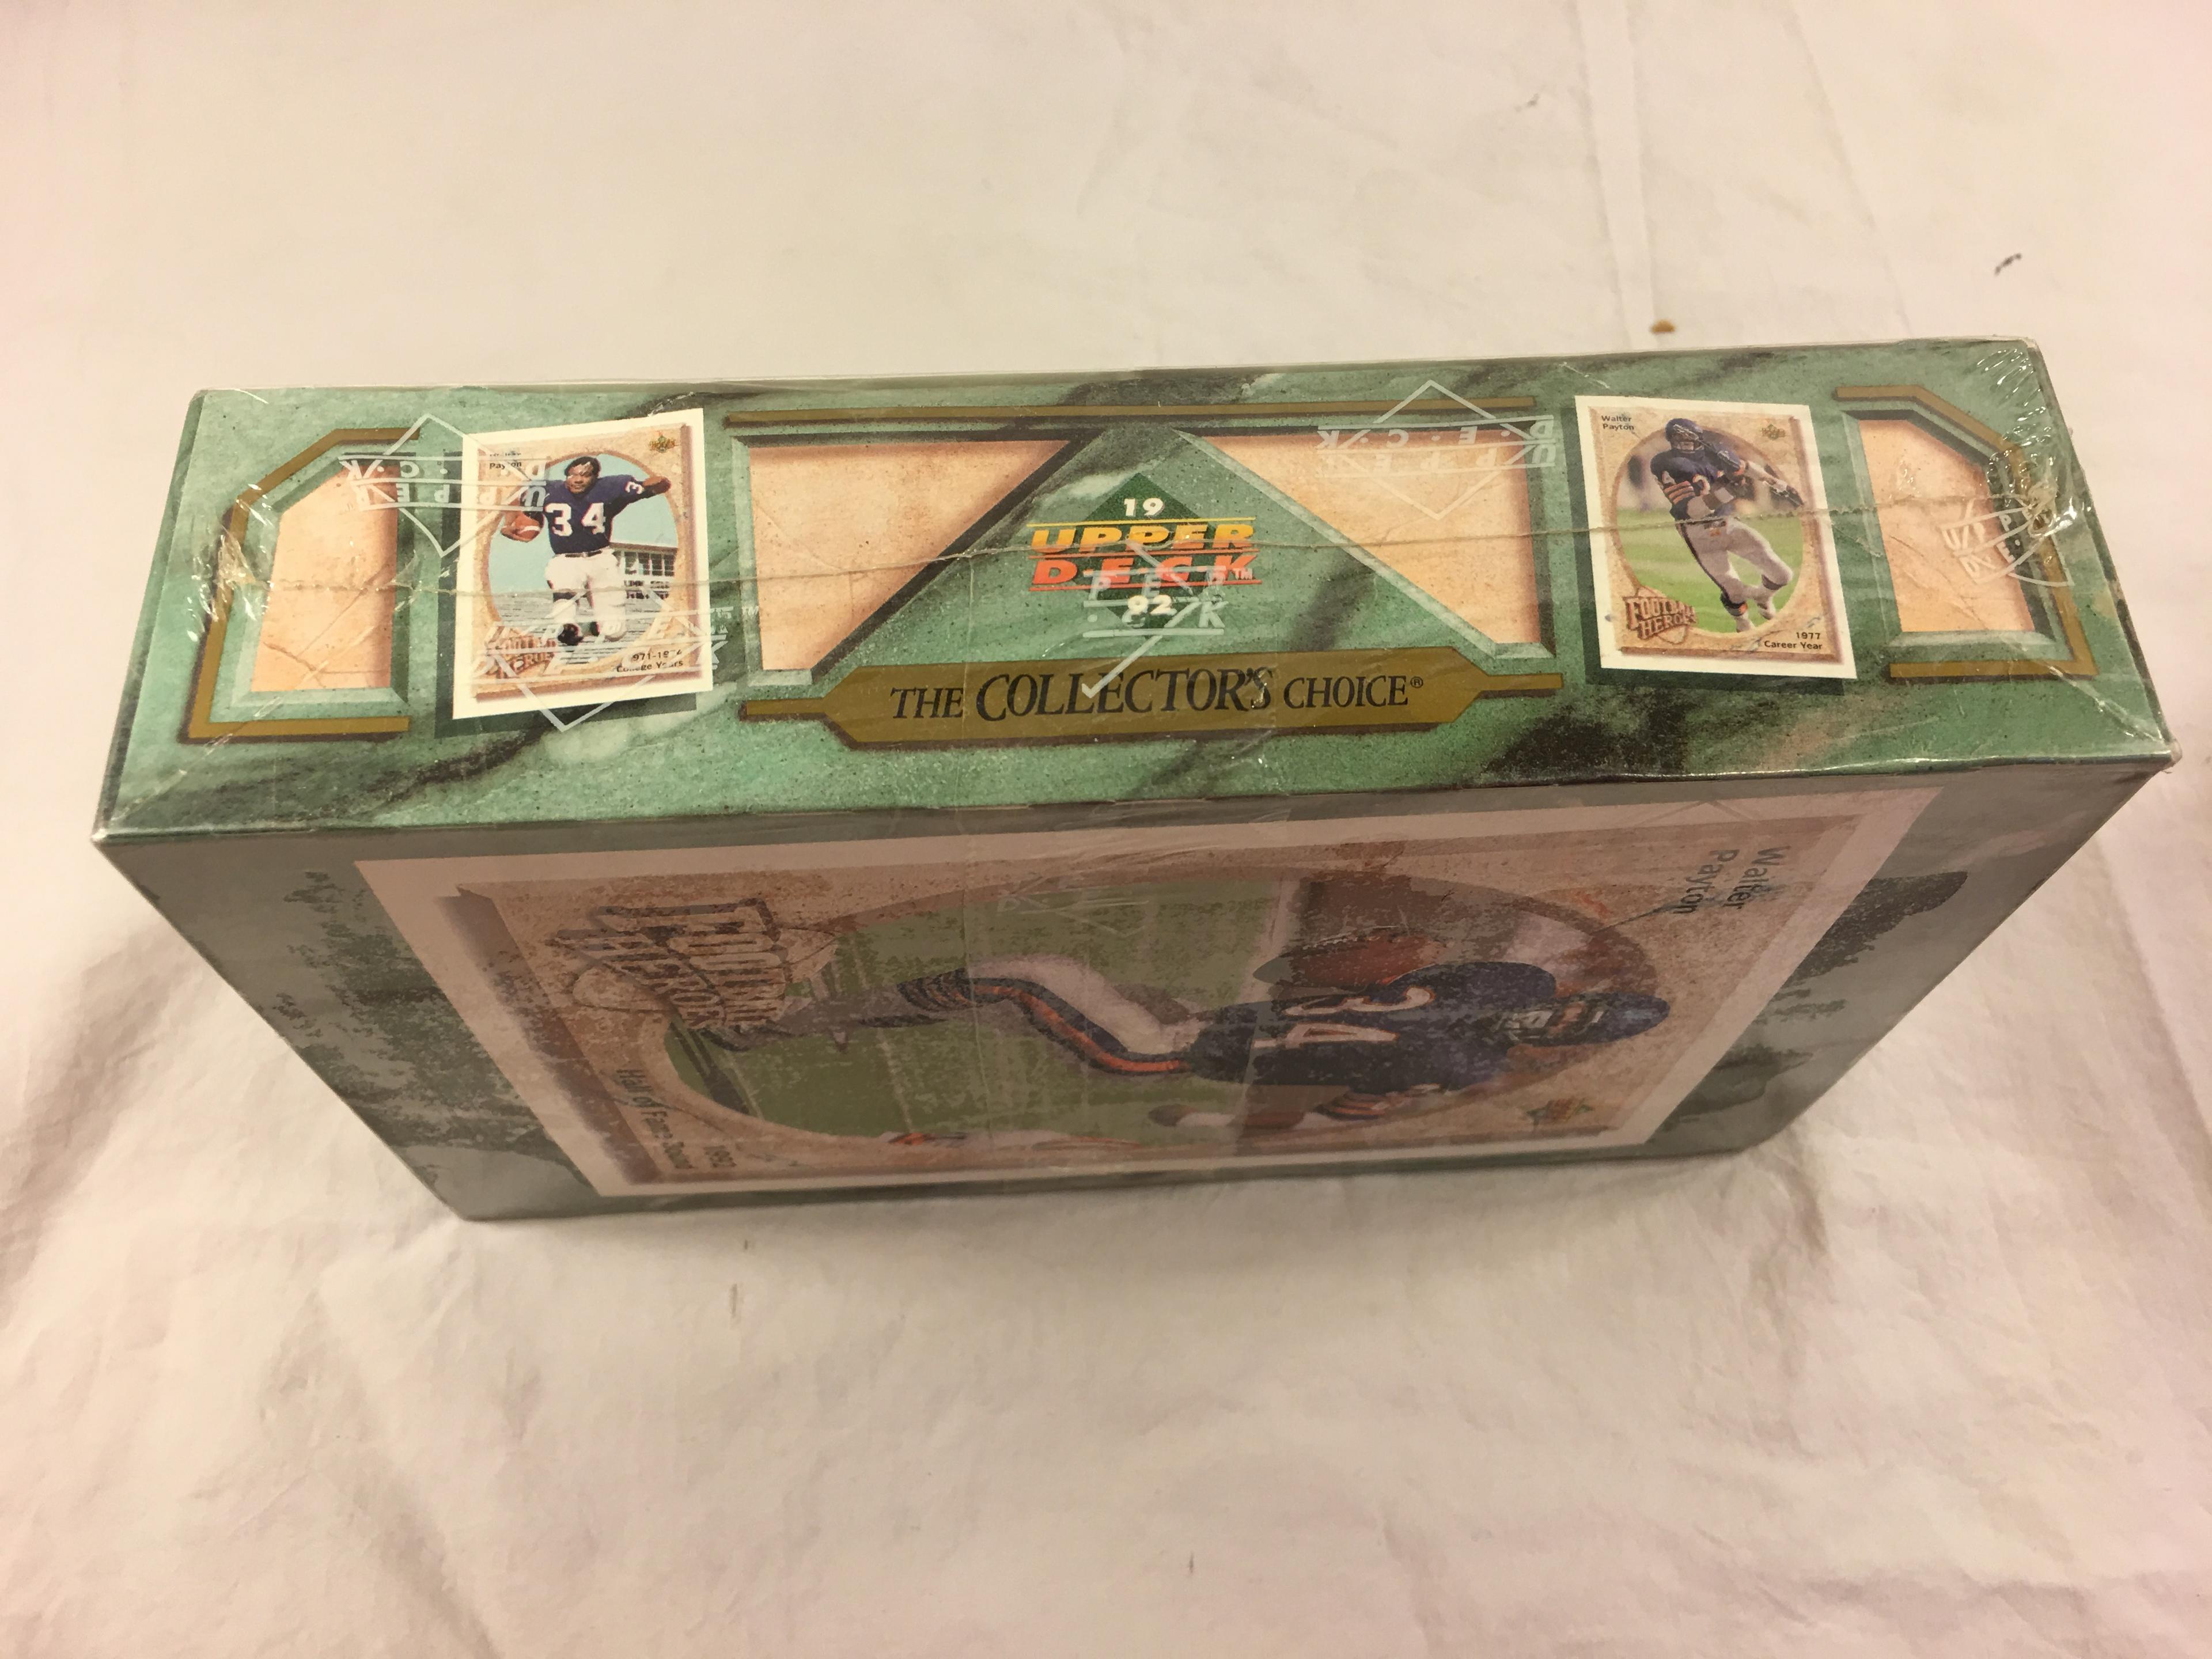 Collector Loose In Box But, Sealed in Package -1992 Upper Deck NFL Football Limited Edition Cards